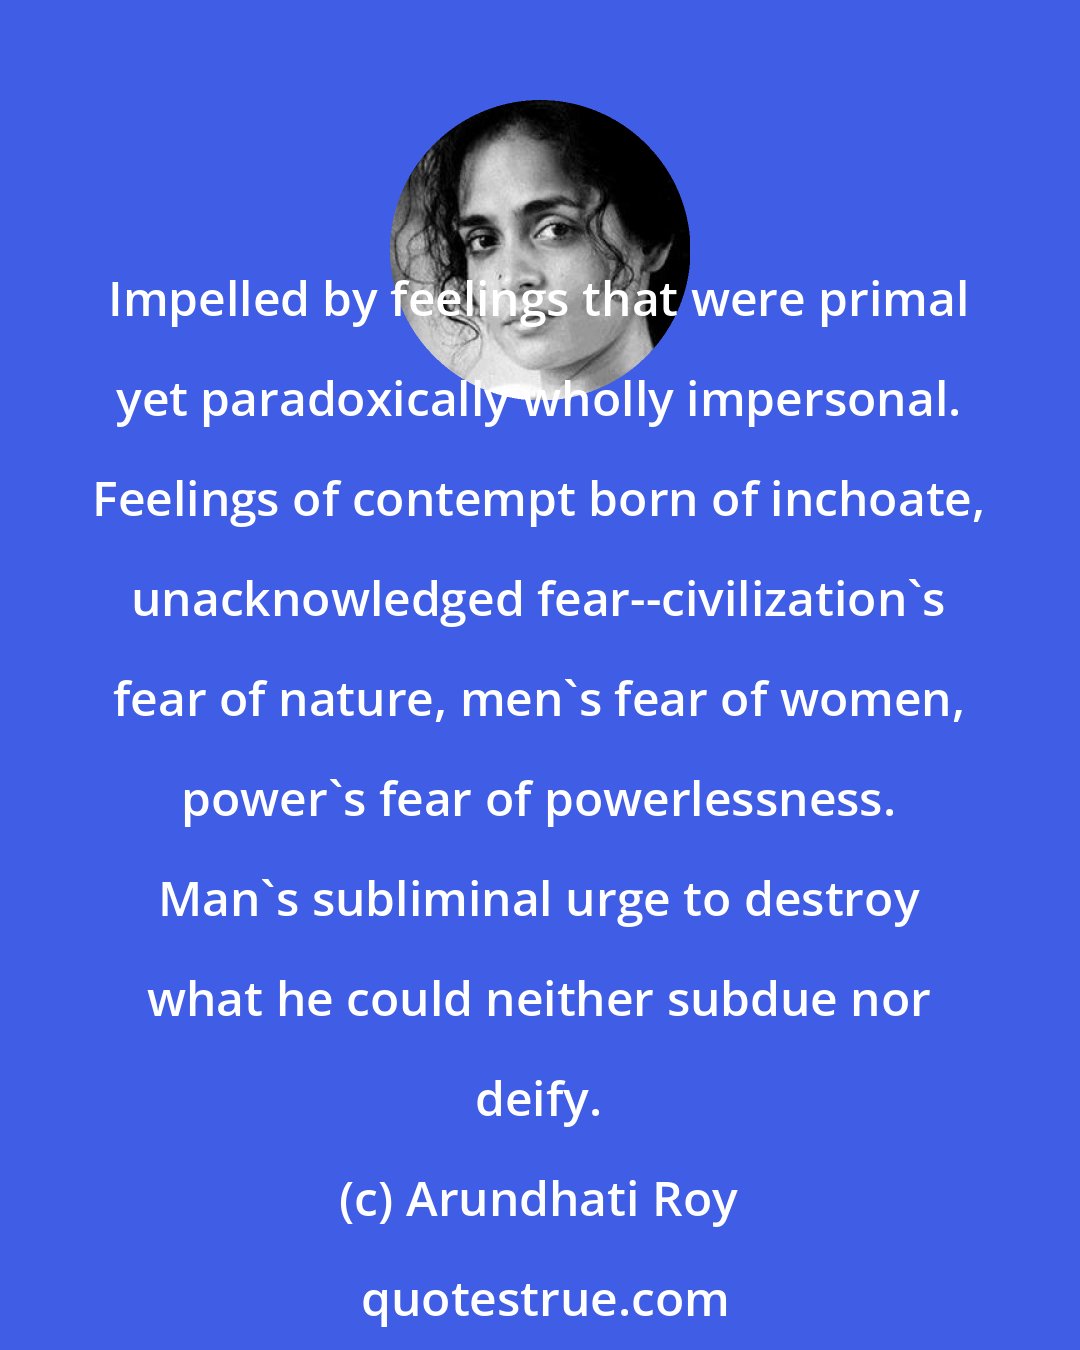 Arundhati Roy: Impelled by feelings that were primal yet paradoxically wholly impersonal. Feelings of contempt born of inchoate, unacknowledged fear--civilization's fear of nature, men's fear of women, power's fear of powerlessness. Man's subliminal urge to destroy what he could neither subdue nor deify.